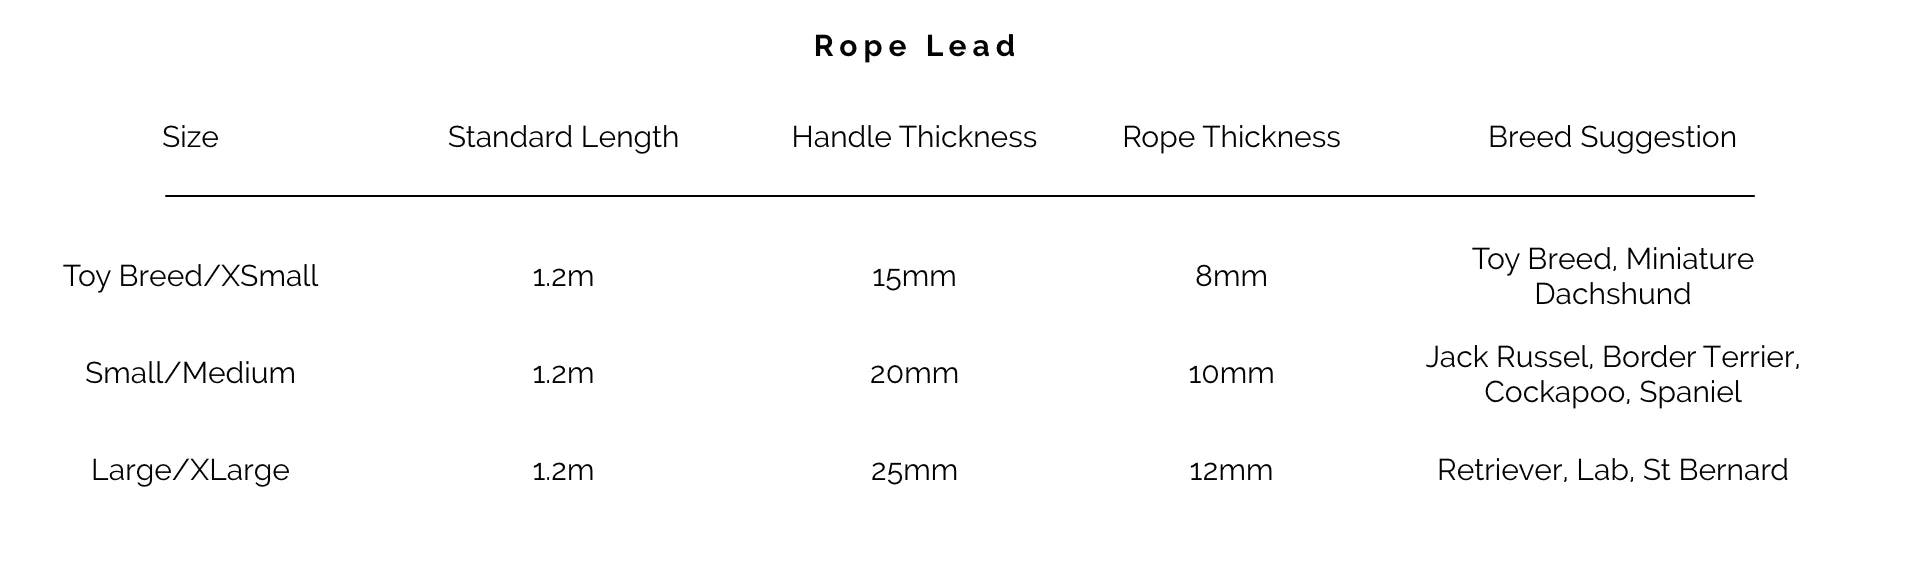 Dog rope lead size guide. stocky & dee.webp__PID:0fe2971f-1d3c-4f45-94a0-628c39691a31